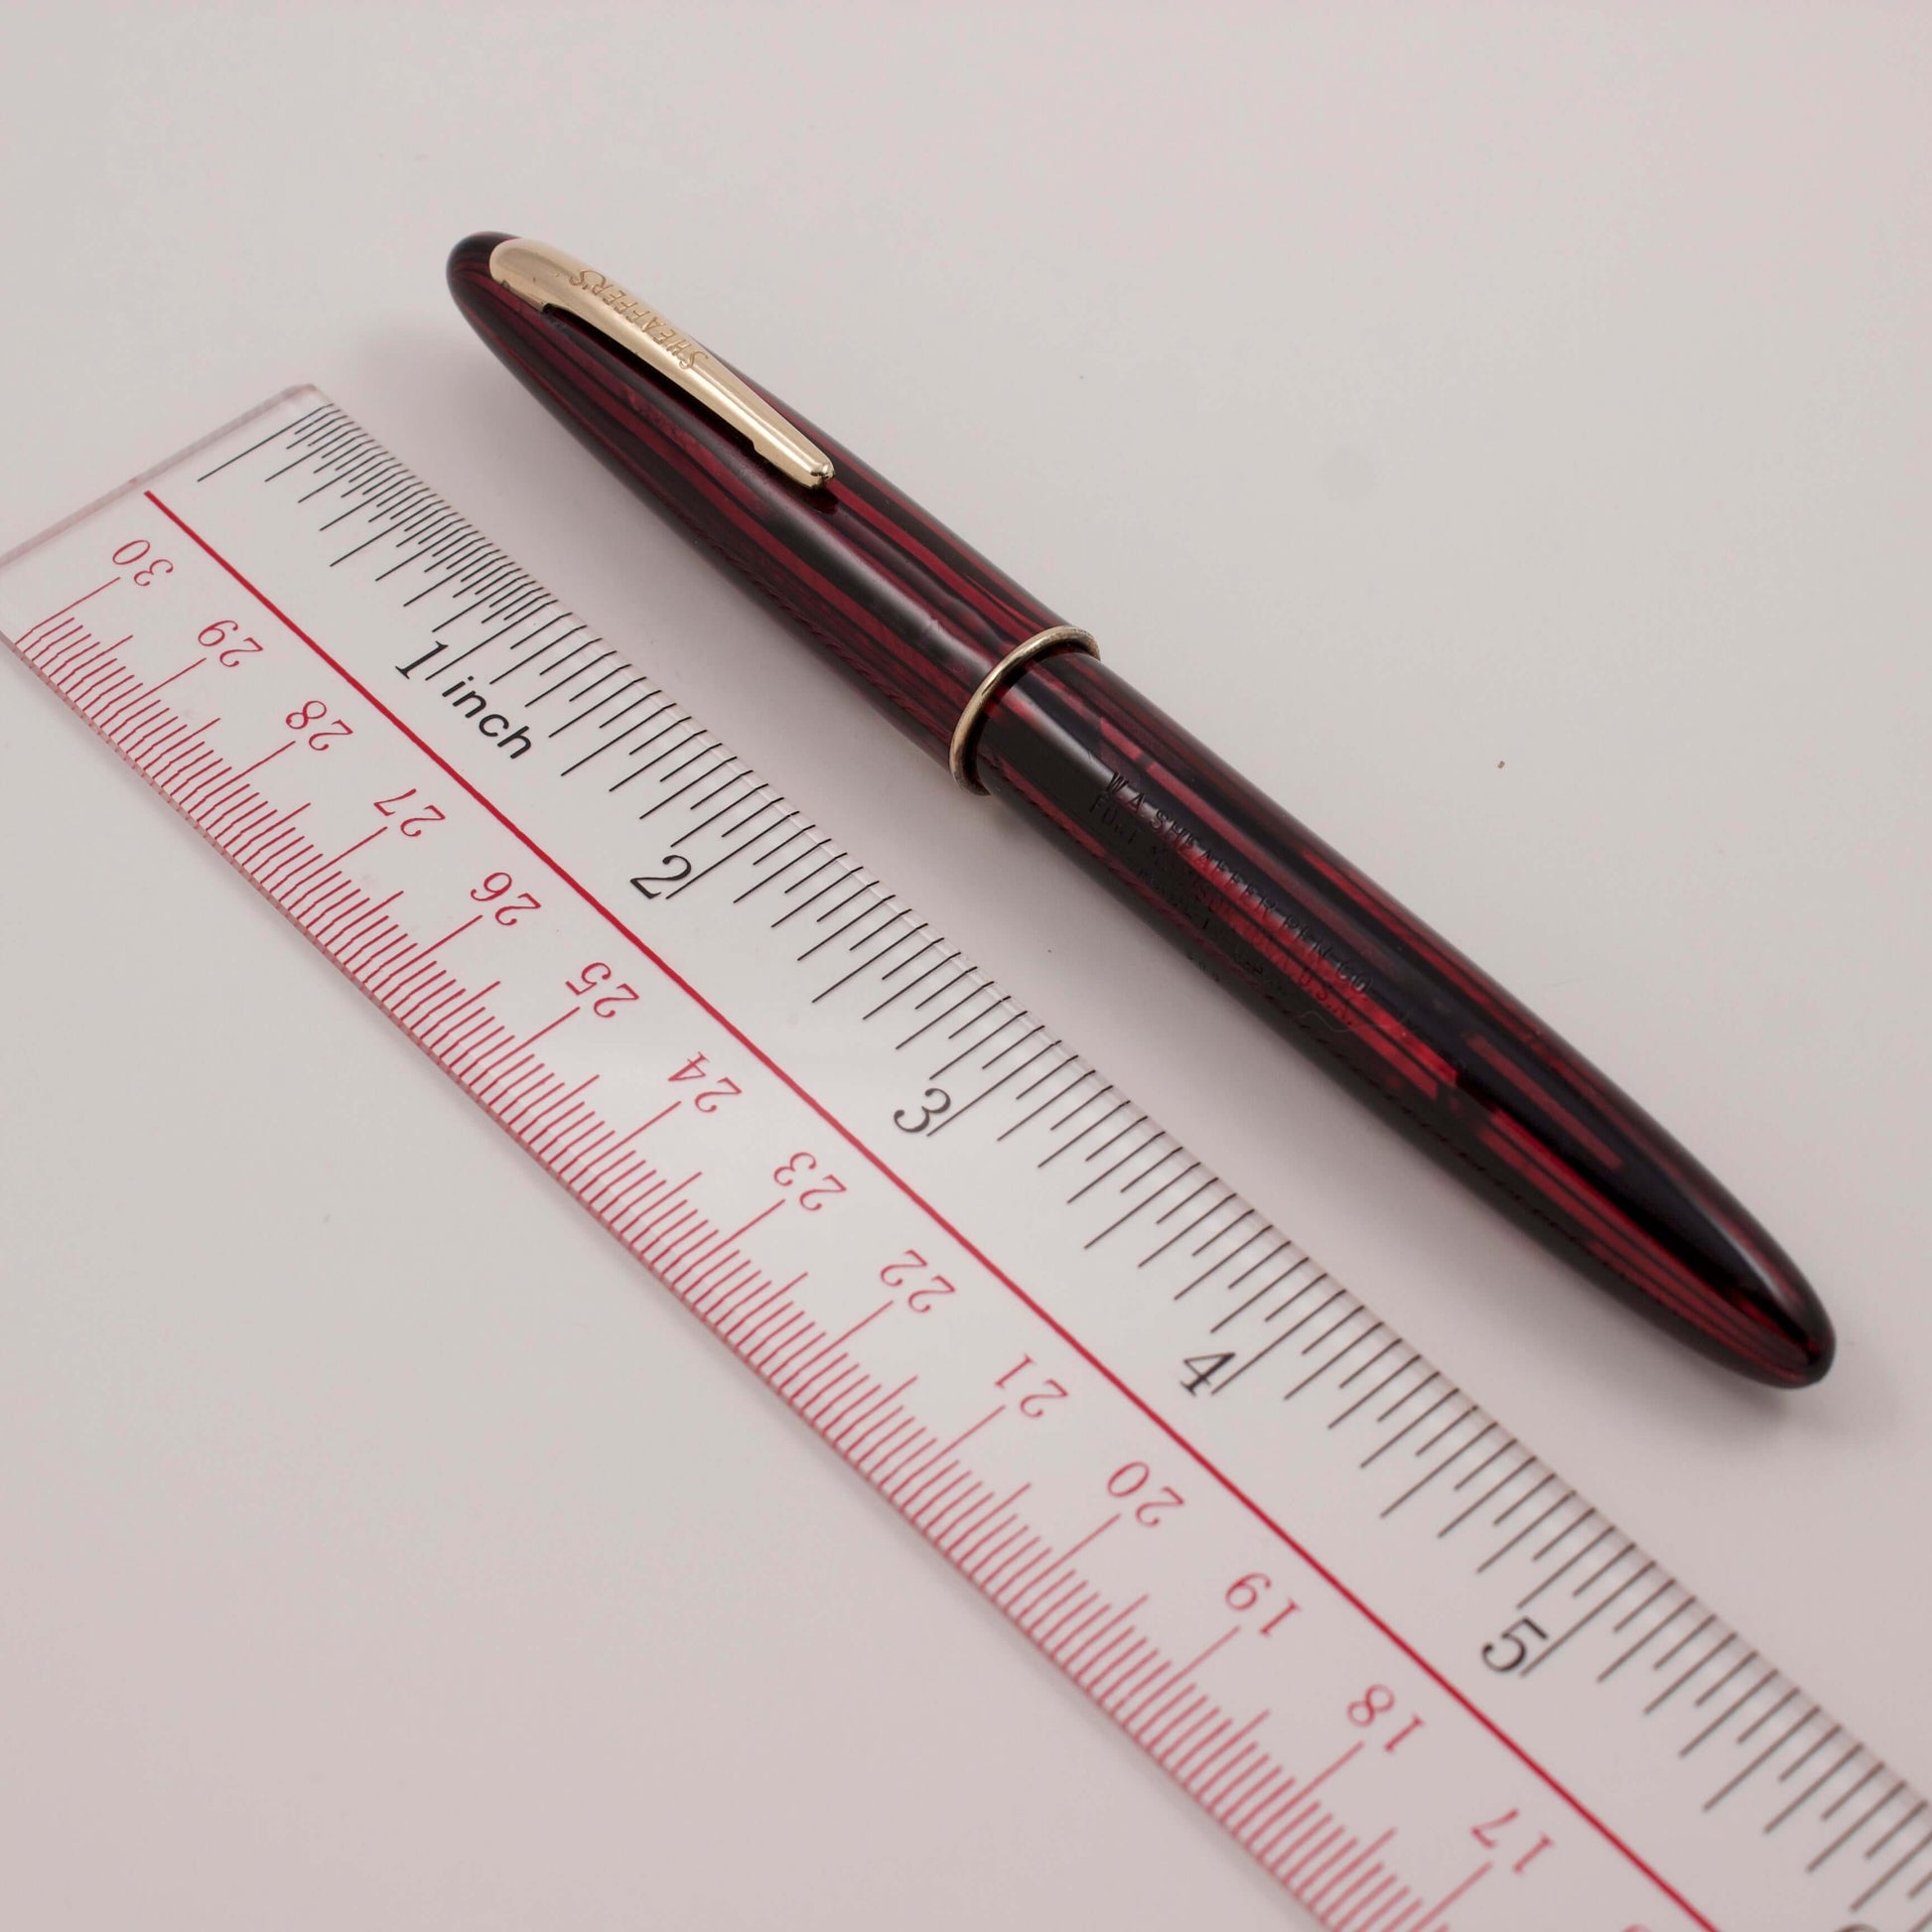 Sheaffer Craftsman Lever Filler, Carmine Red. Number 5 Feather Touch 14K Gold Nib Fine Point. Type: Lever Filler Vintage Fountain Pen Product Name: Sheaffer Craftsman Manufacturer and Year: Approx. 1945 Length: 5 Inches Filling System: Lever Filler, with